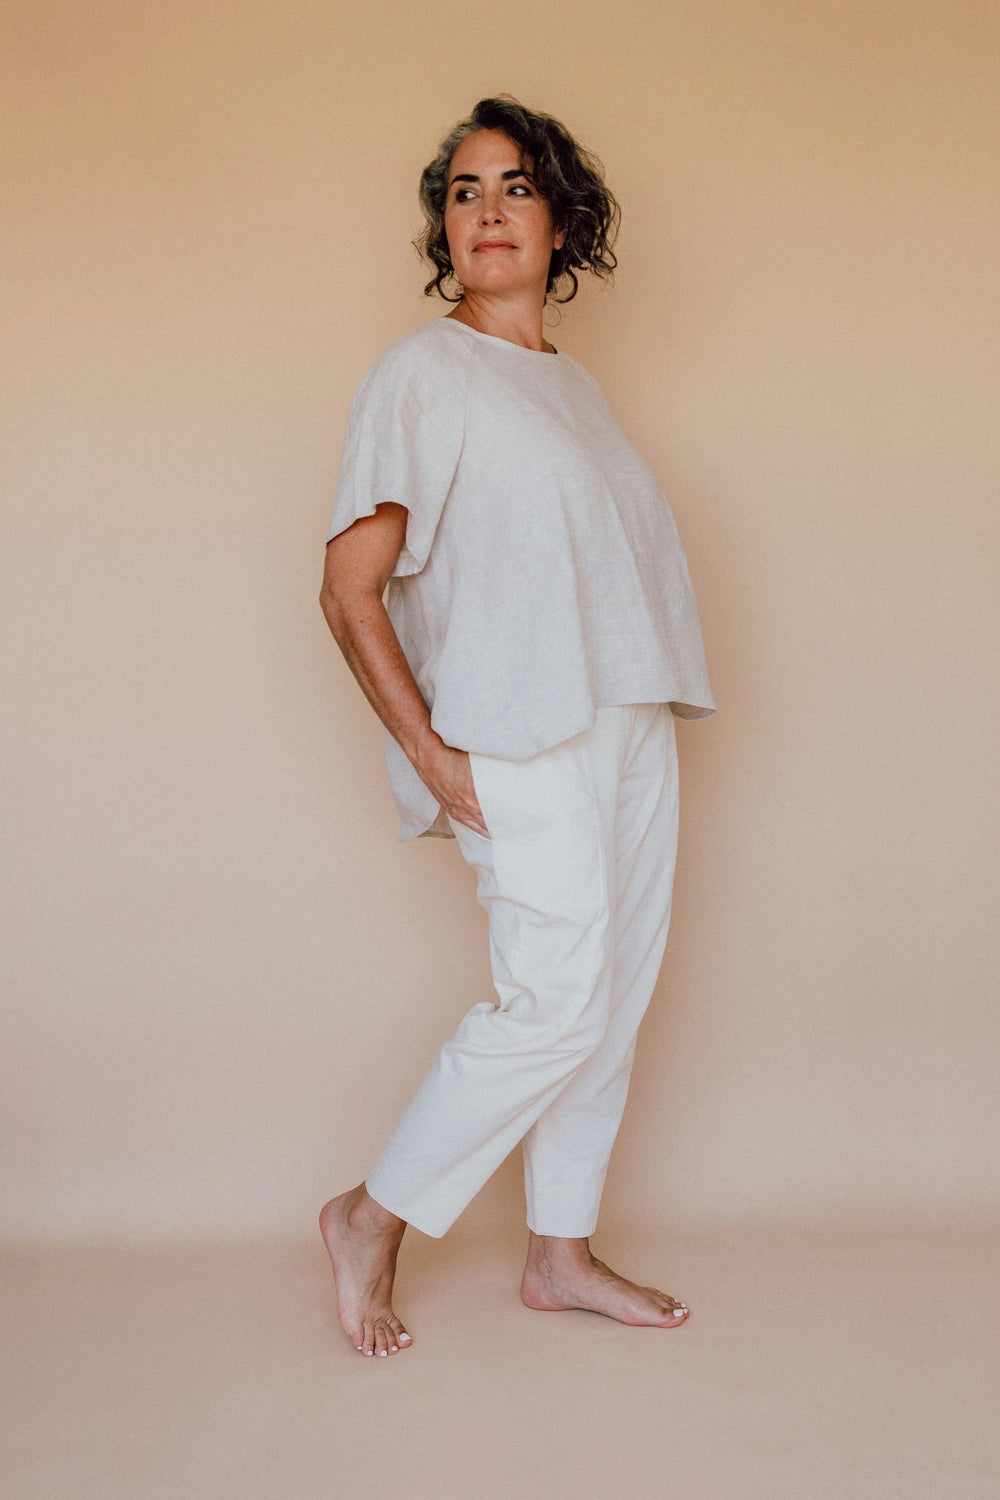 Woman wearing the Darlow Pants sewing pattern from In the Folds on The Fold Line. A trouser pattern made in linen, linen blends, cotton drill/twill, denim or wool fabrics, featuring a cropped length, tapered leg with panel lines and details, sitting on th